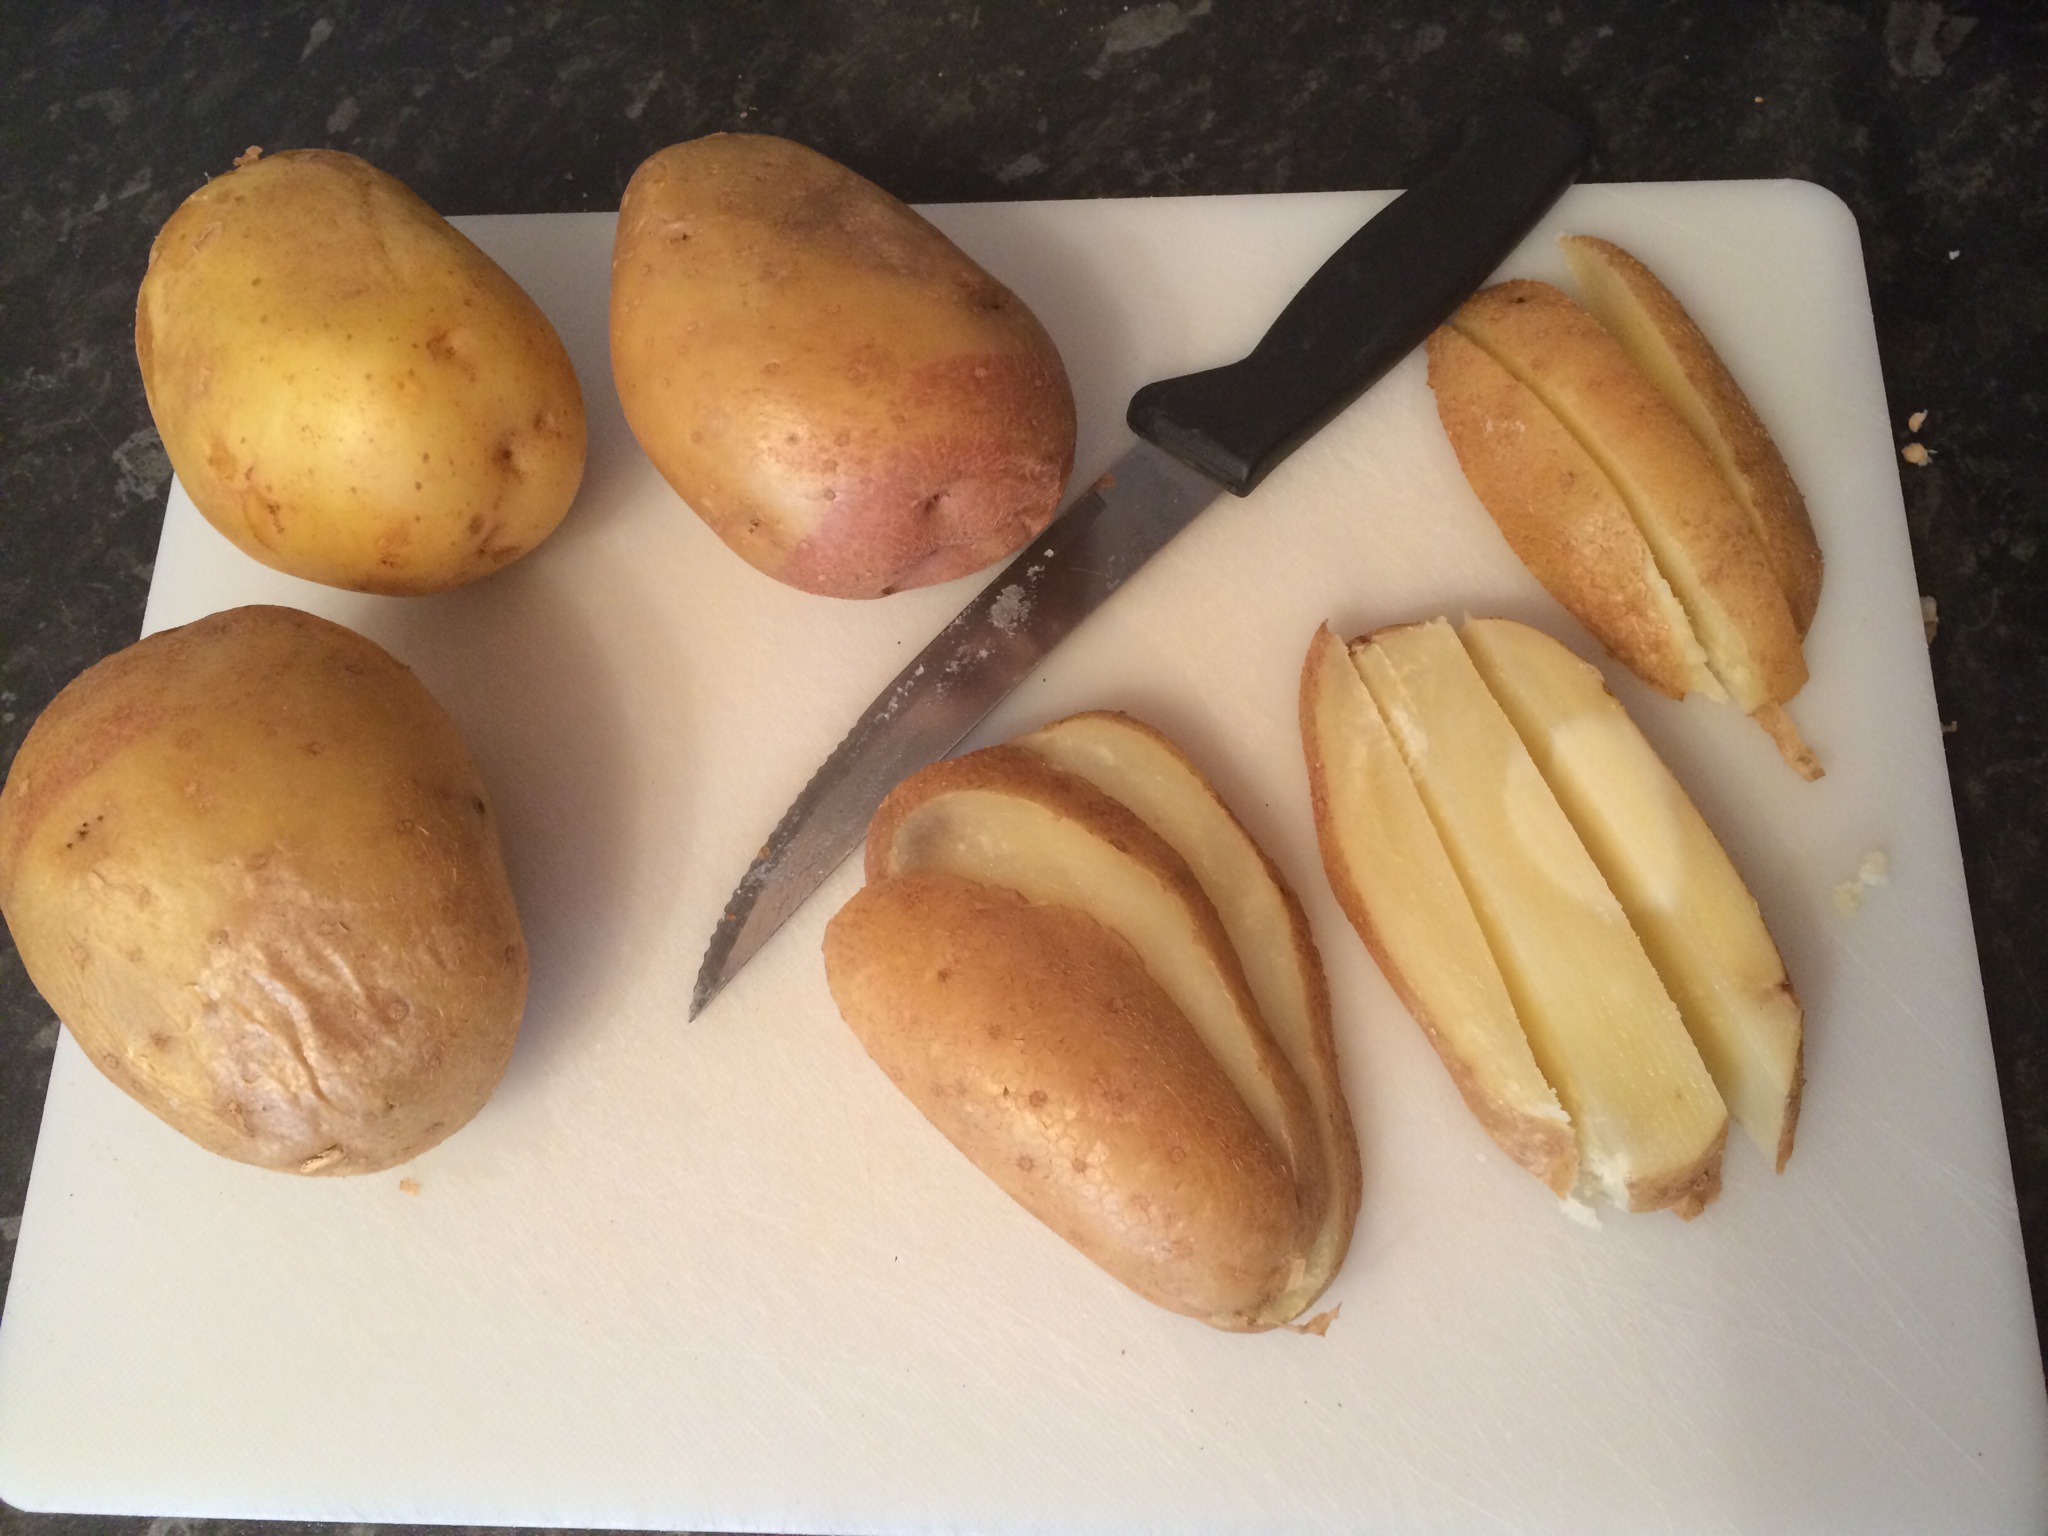 When they come out and you can handle them (although I'm too impatient to wait) slice them thickly and cut into chips